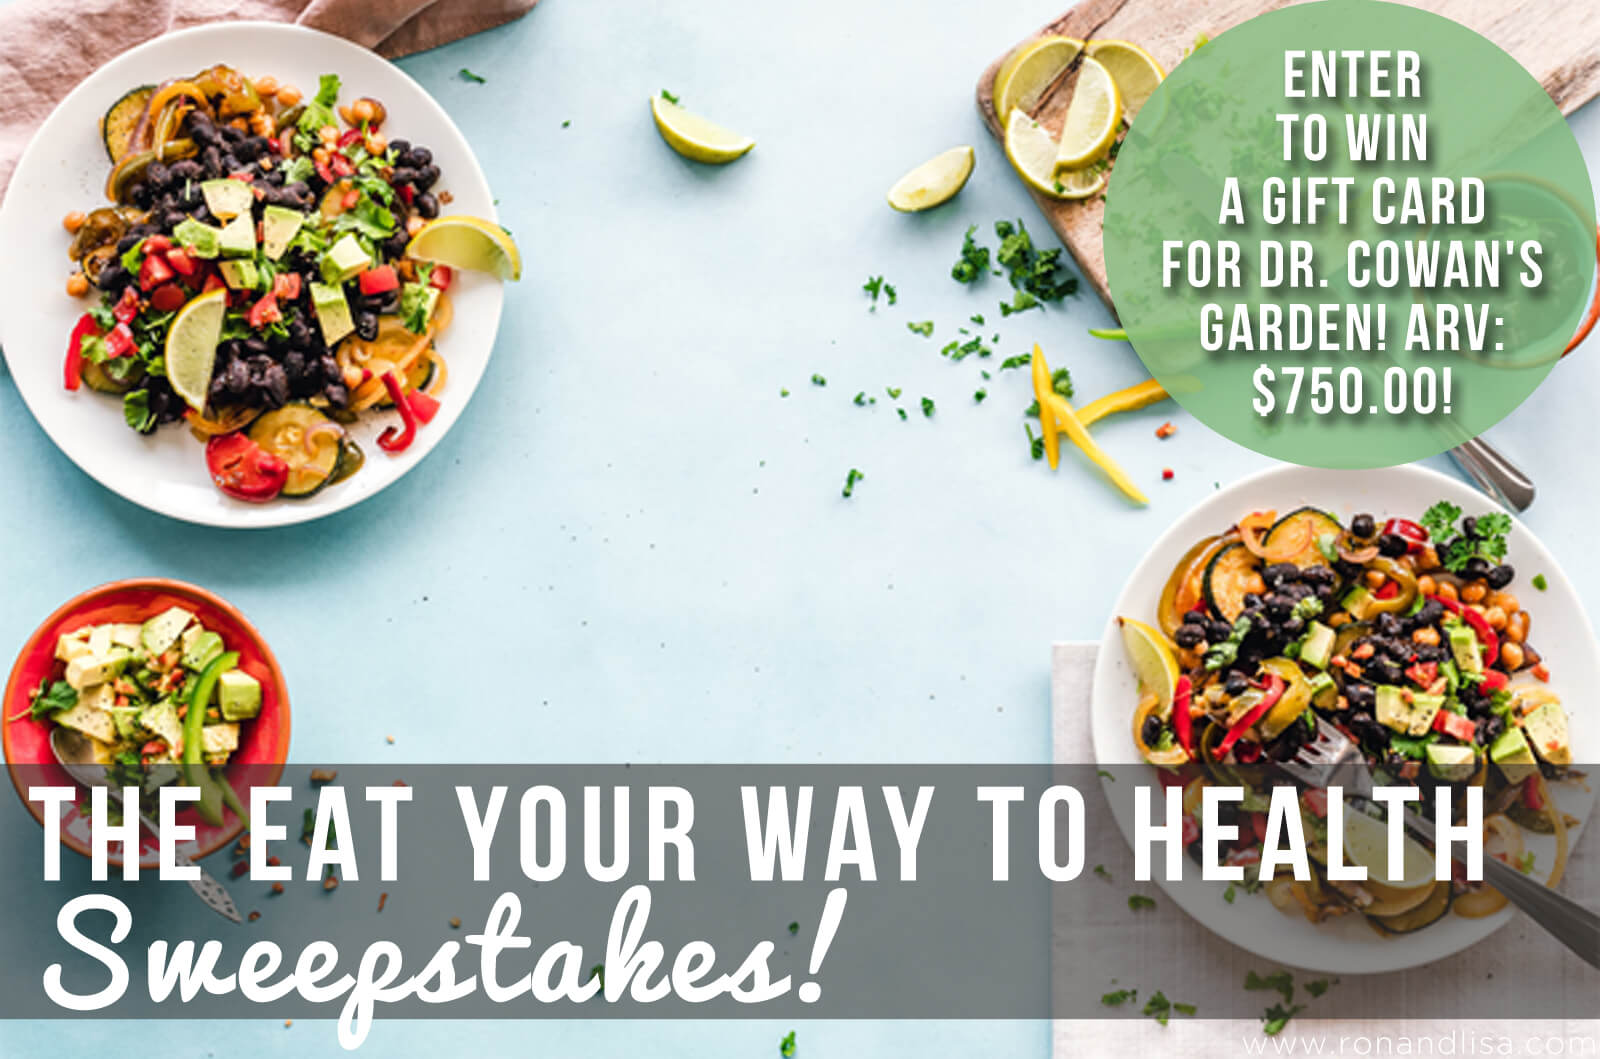 The Eat Your Way To Health Sweepstakes!